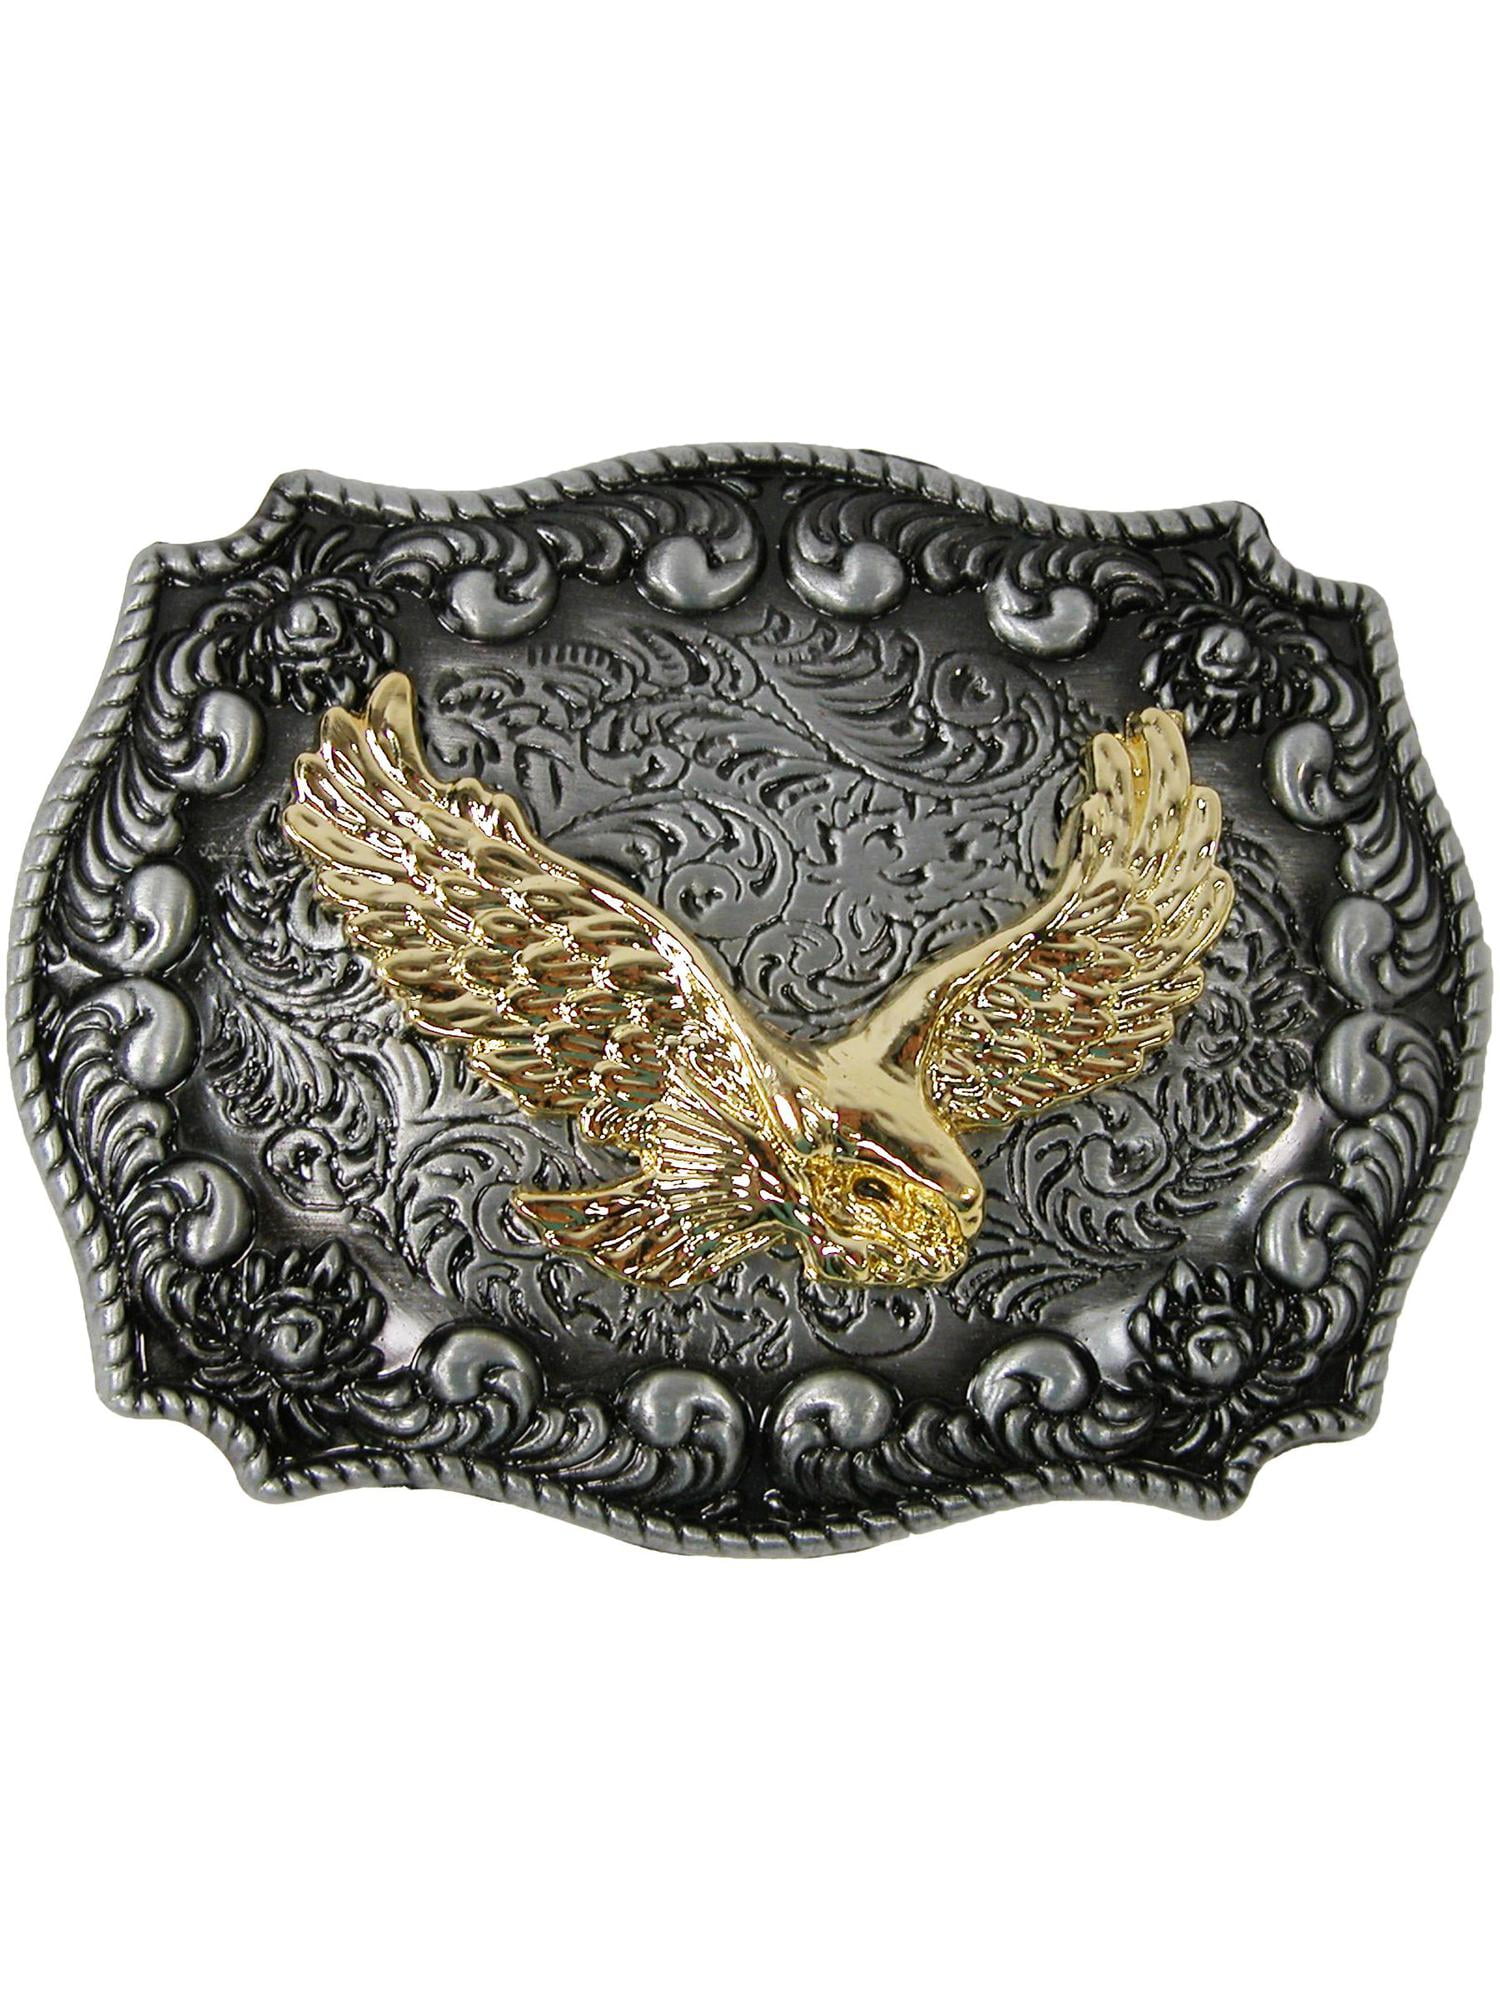 Tiger Scorpion Belt Buckle Removable Western Cowboy SILVER HIGH QUALITY 